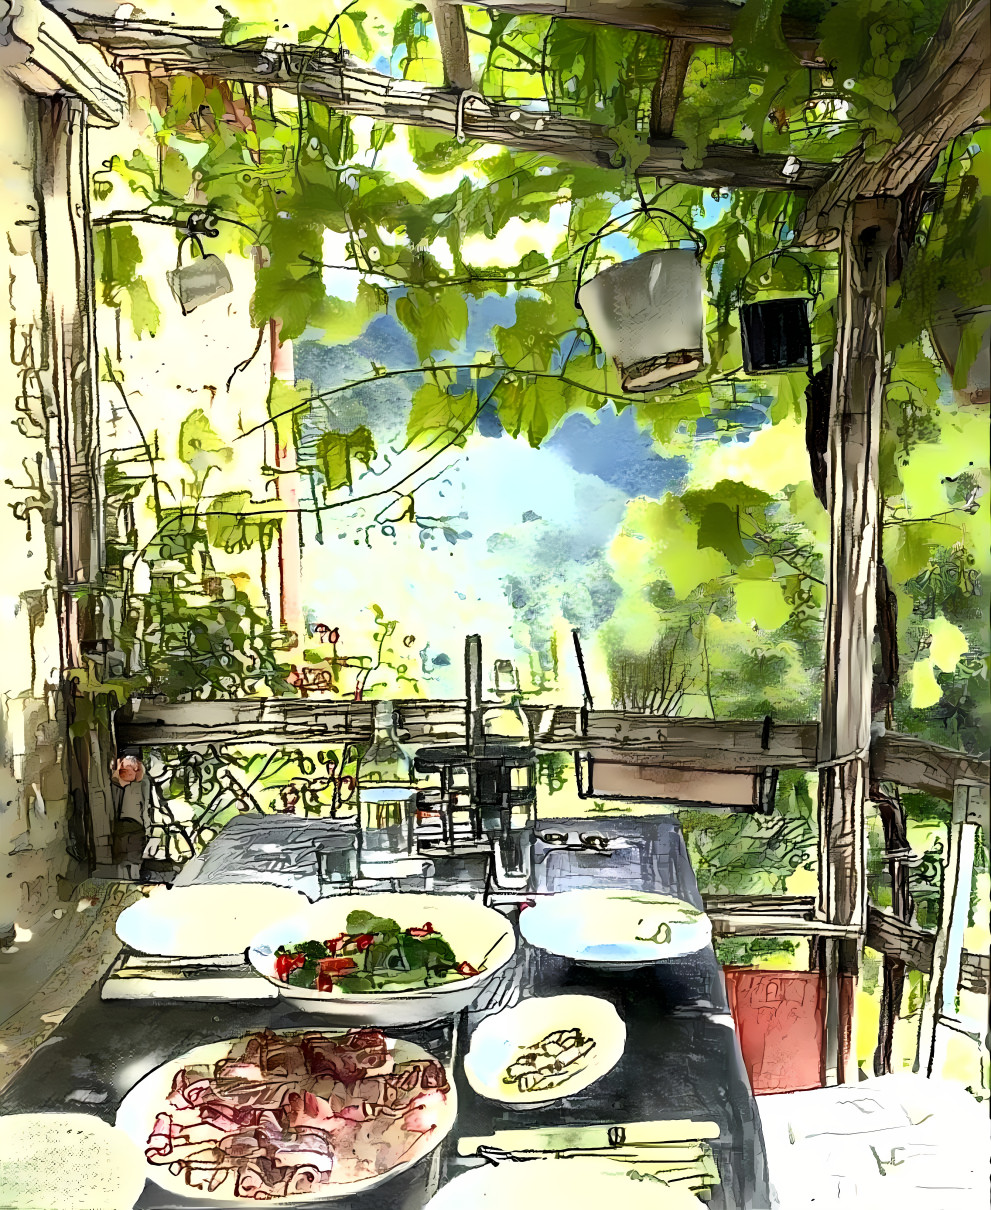 Lunch in Liguria, Italy